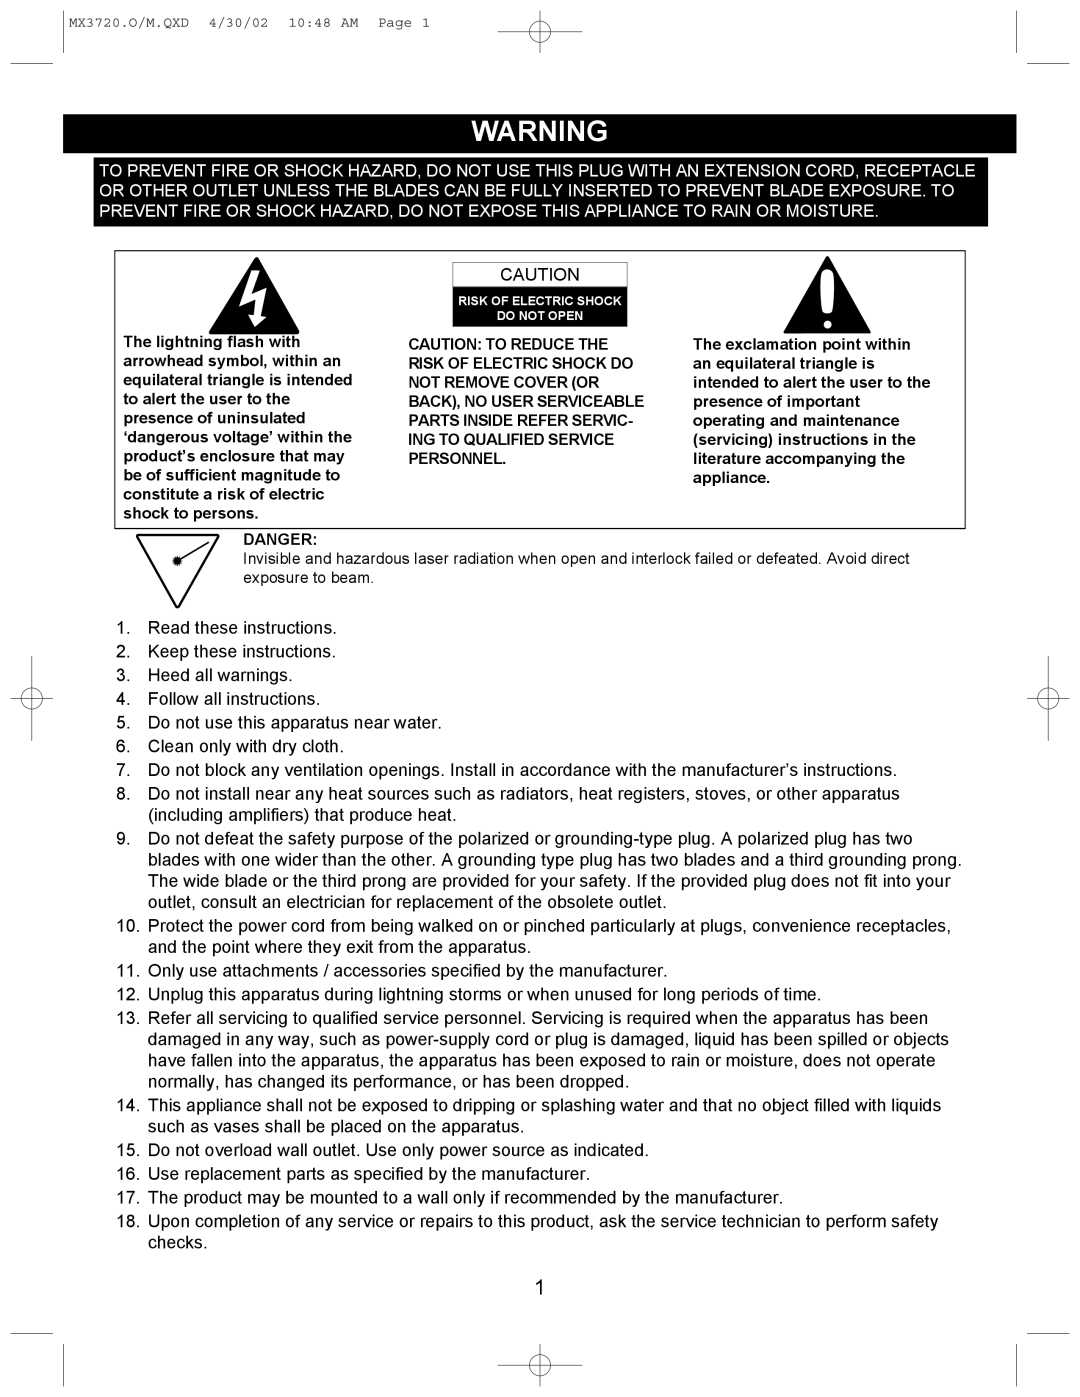 Memorex MX3720 manual Read these instructions 